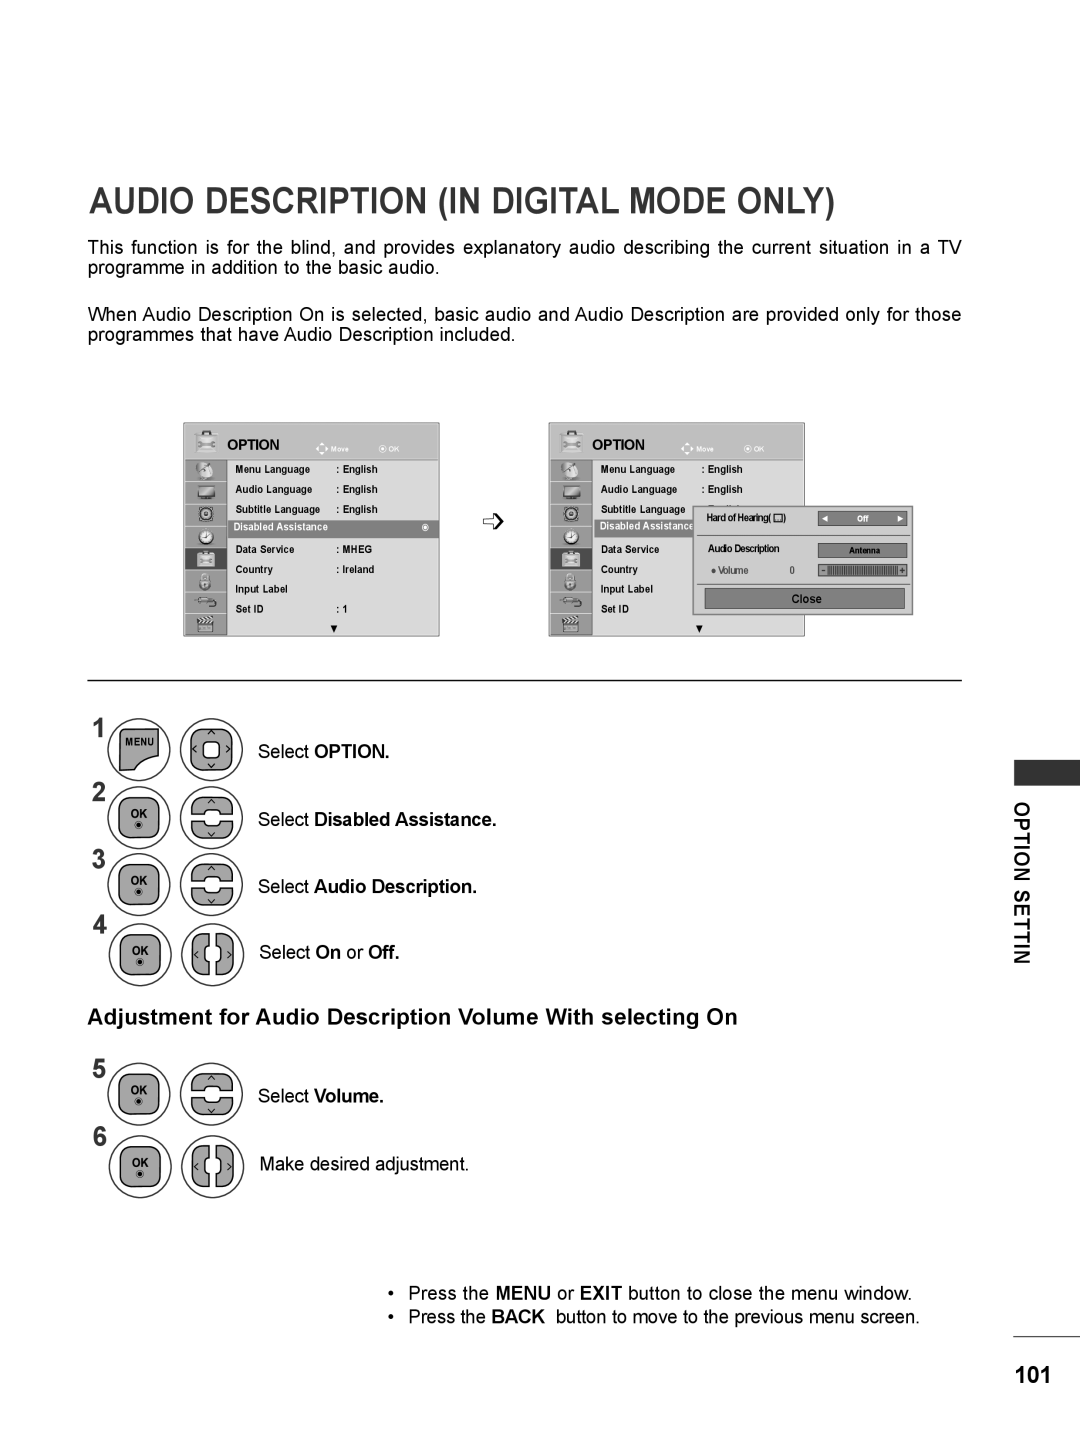 LG Electronics M2080D Audio Description In Digital Mode Only, Adjustment for Audio Description Volume With selecting On 